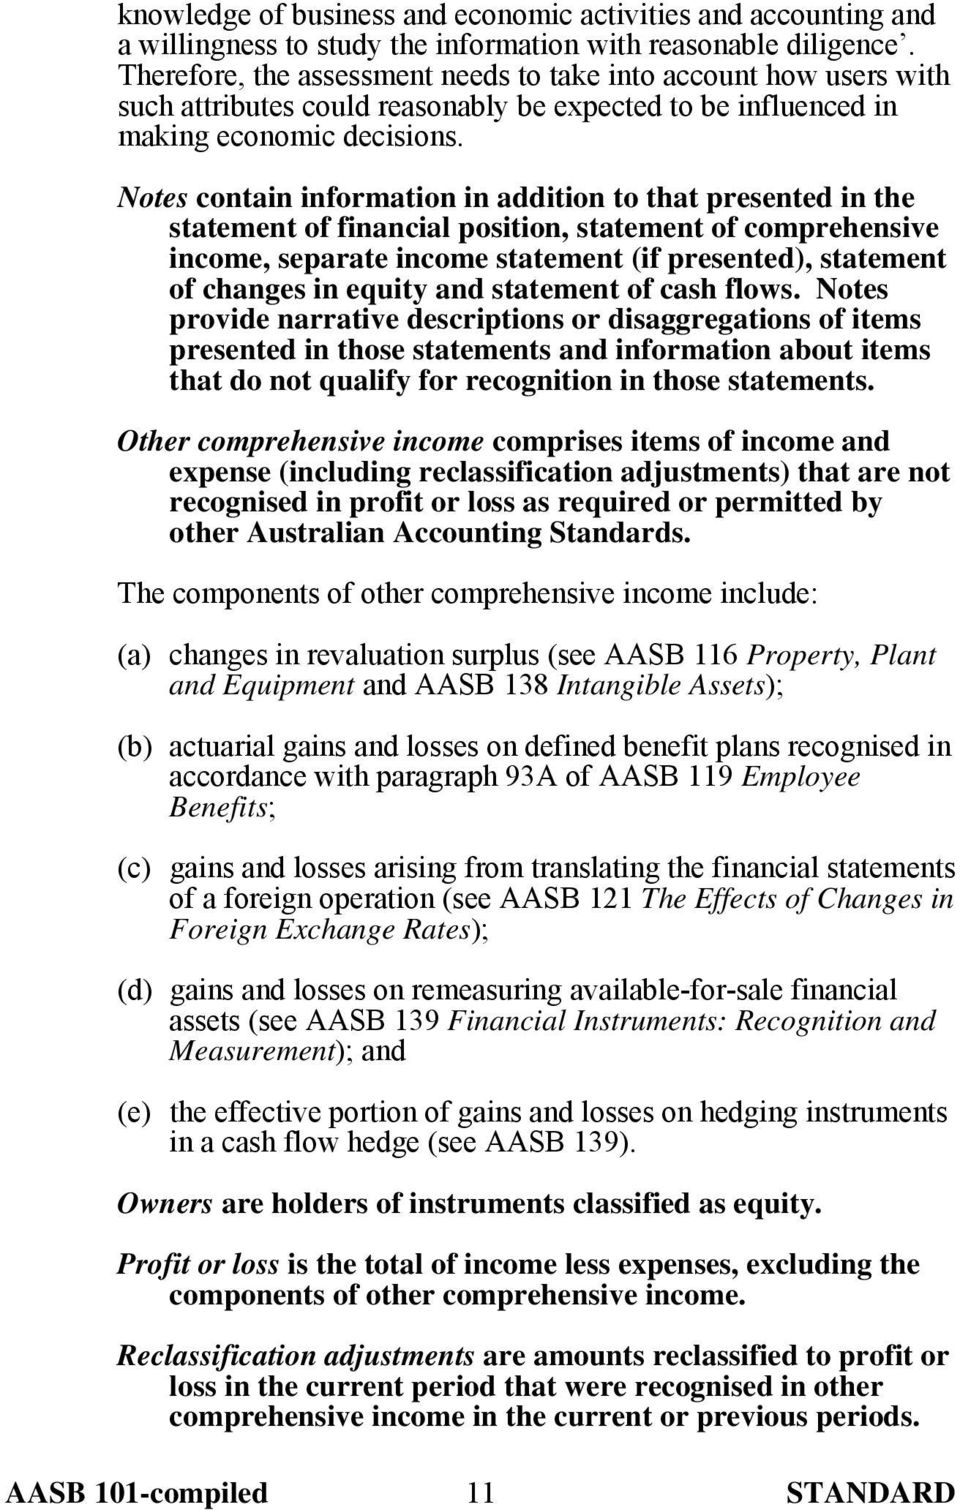 Notes contain information in addition to that presented in the statement of financial position, statement of comprehensive income, separate income statement (if presented), statement of changes in